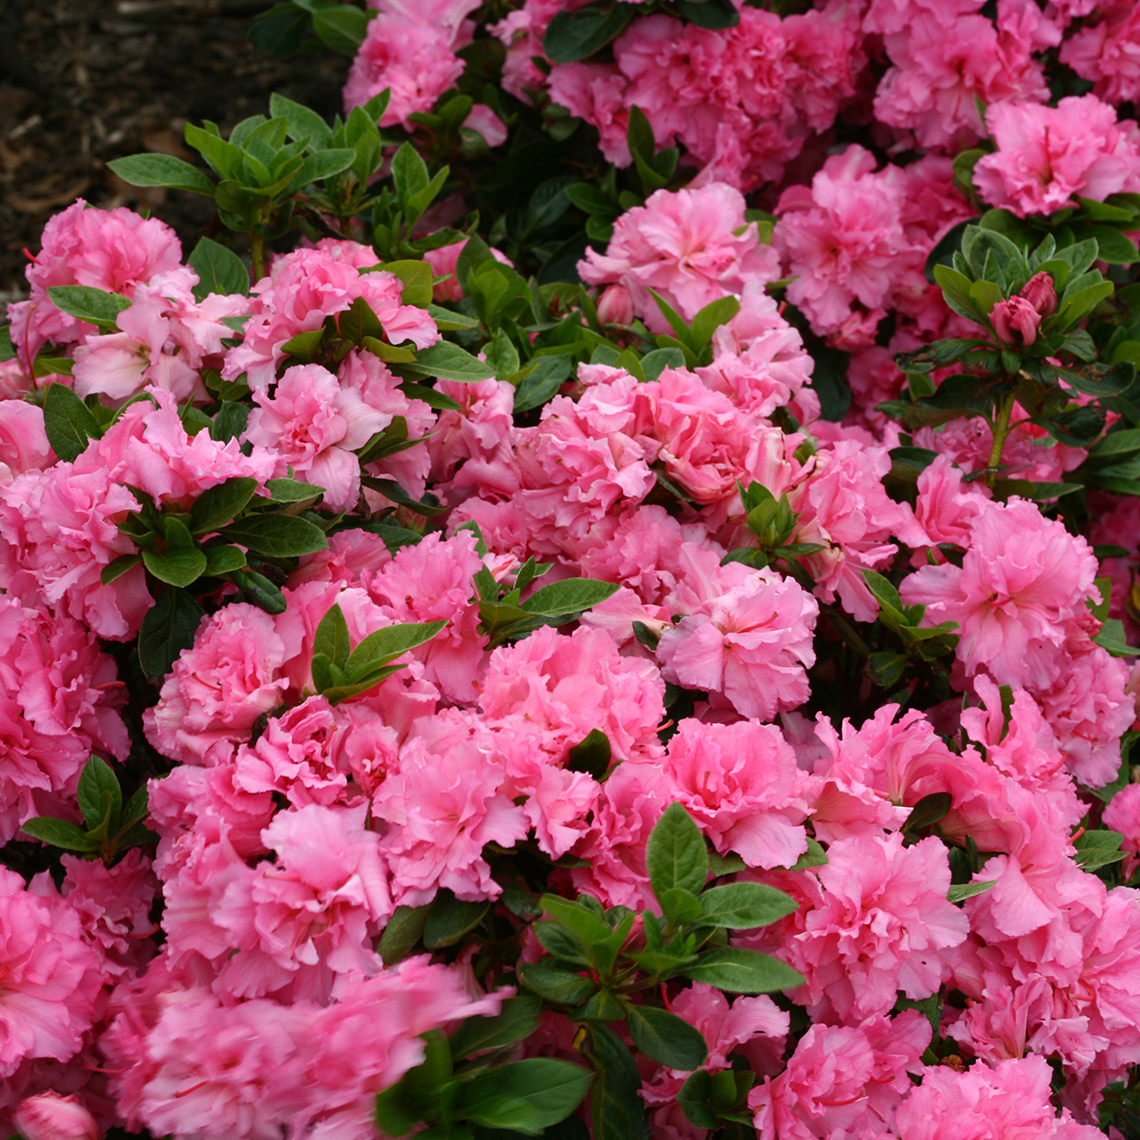 Mound of Bloom-A-Thon Pink Double reblooming azalea in full bloom